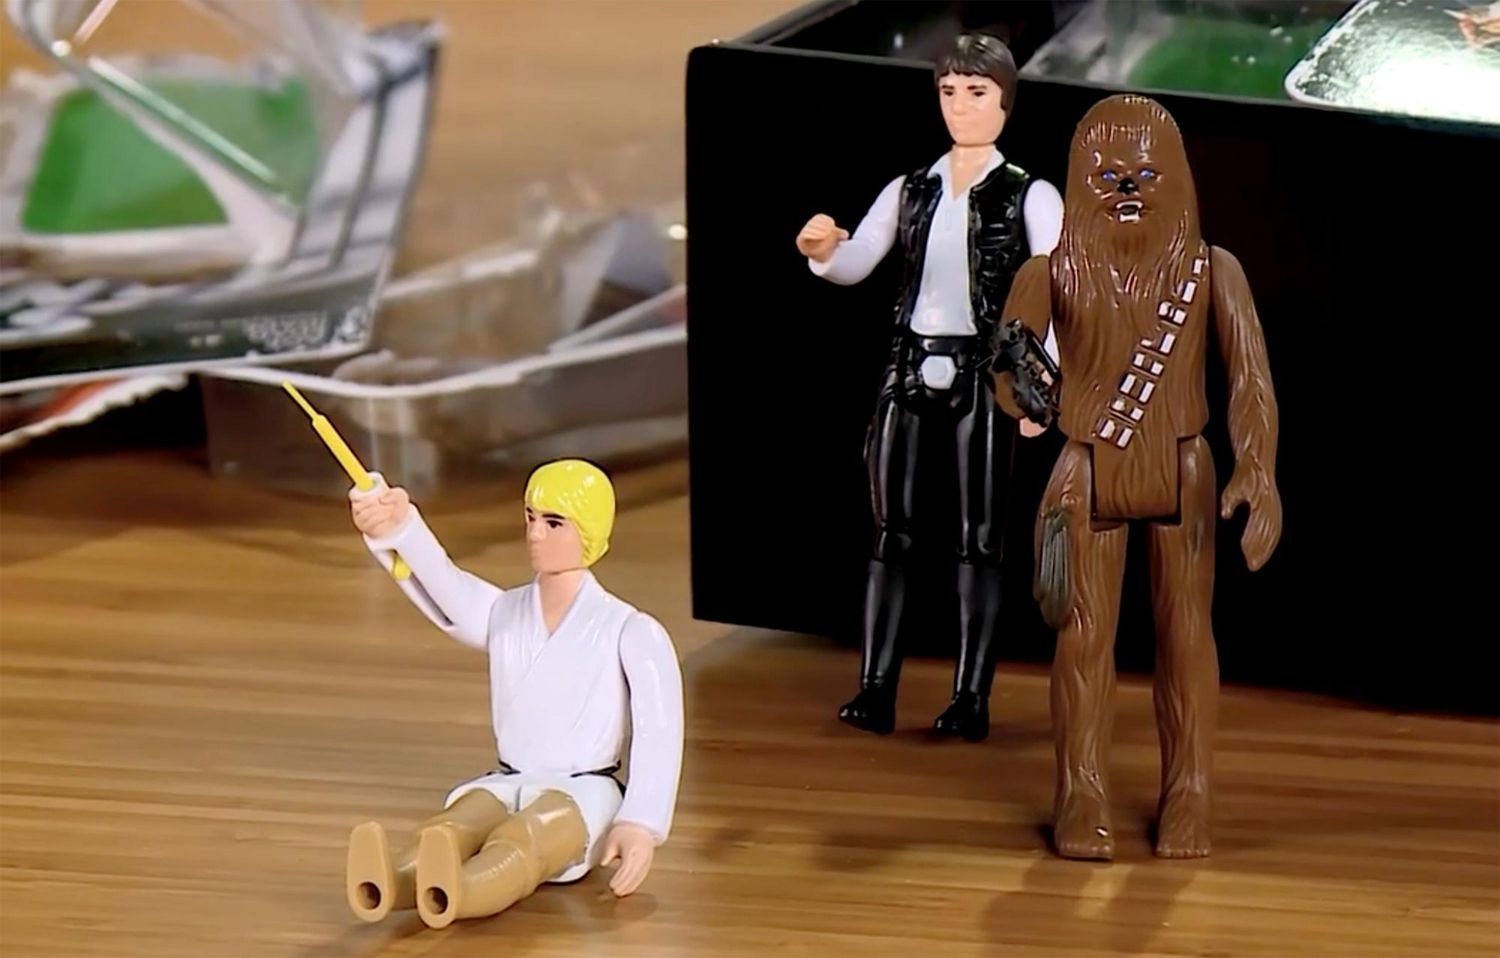 classic star wars toys